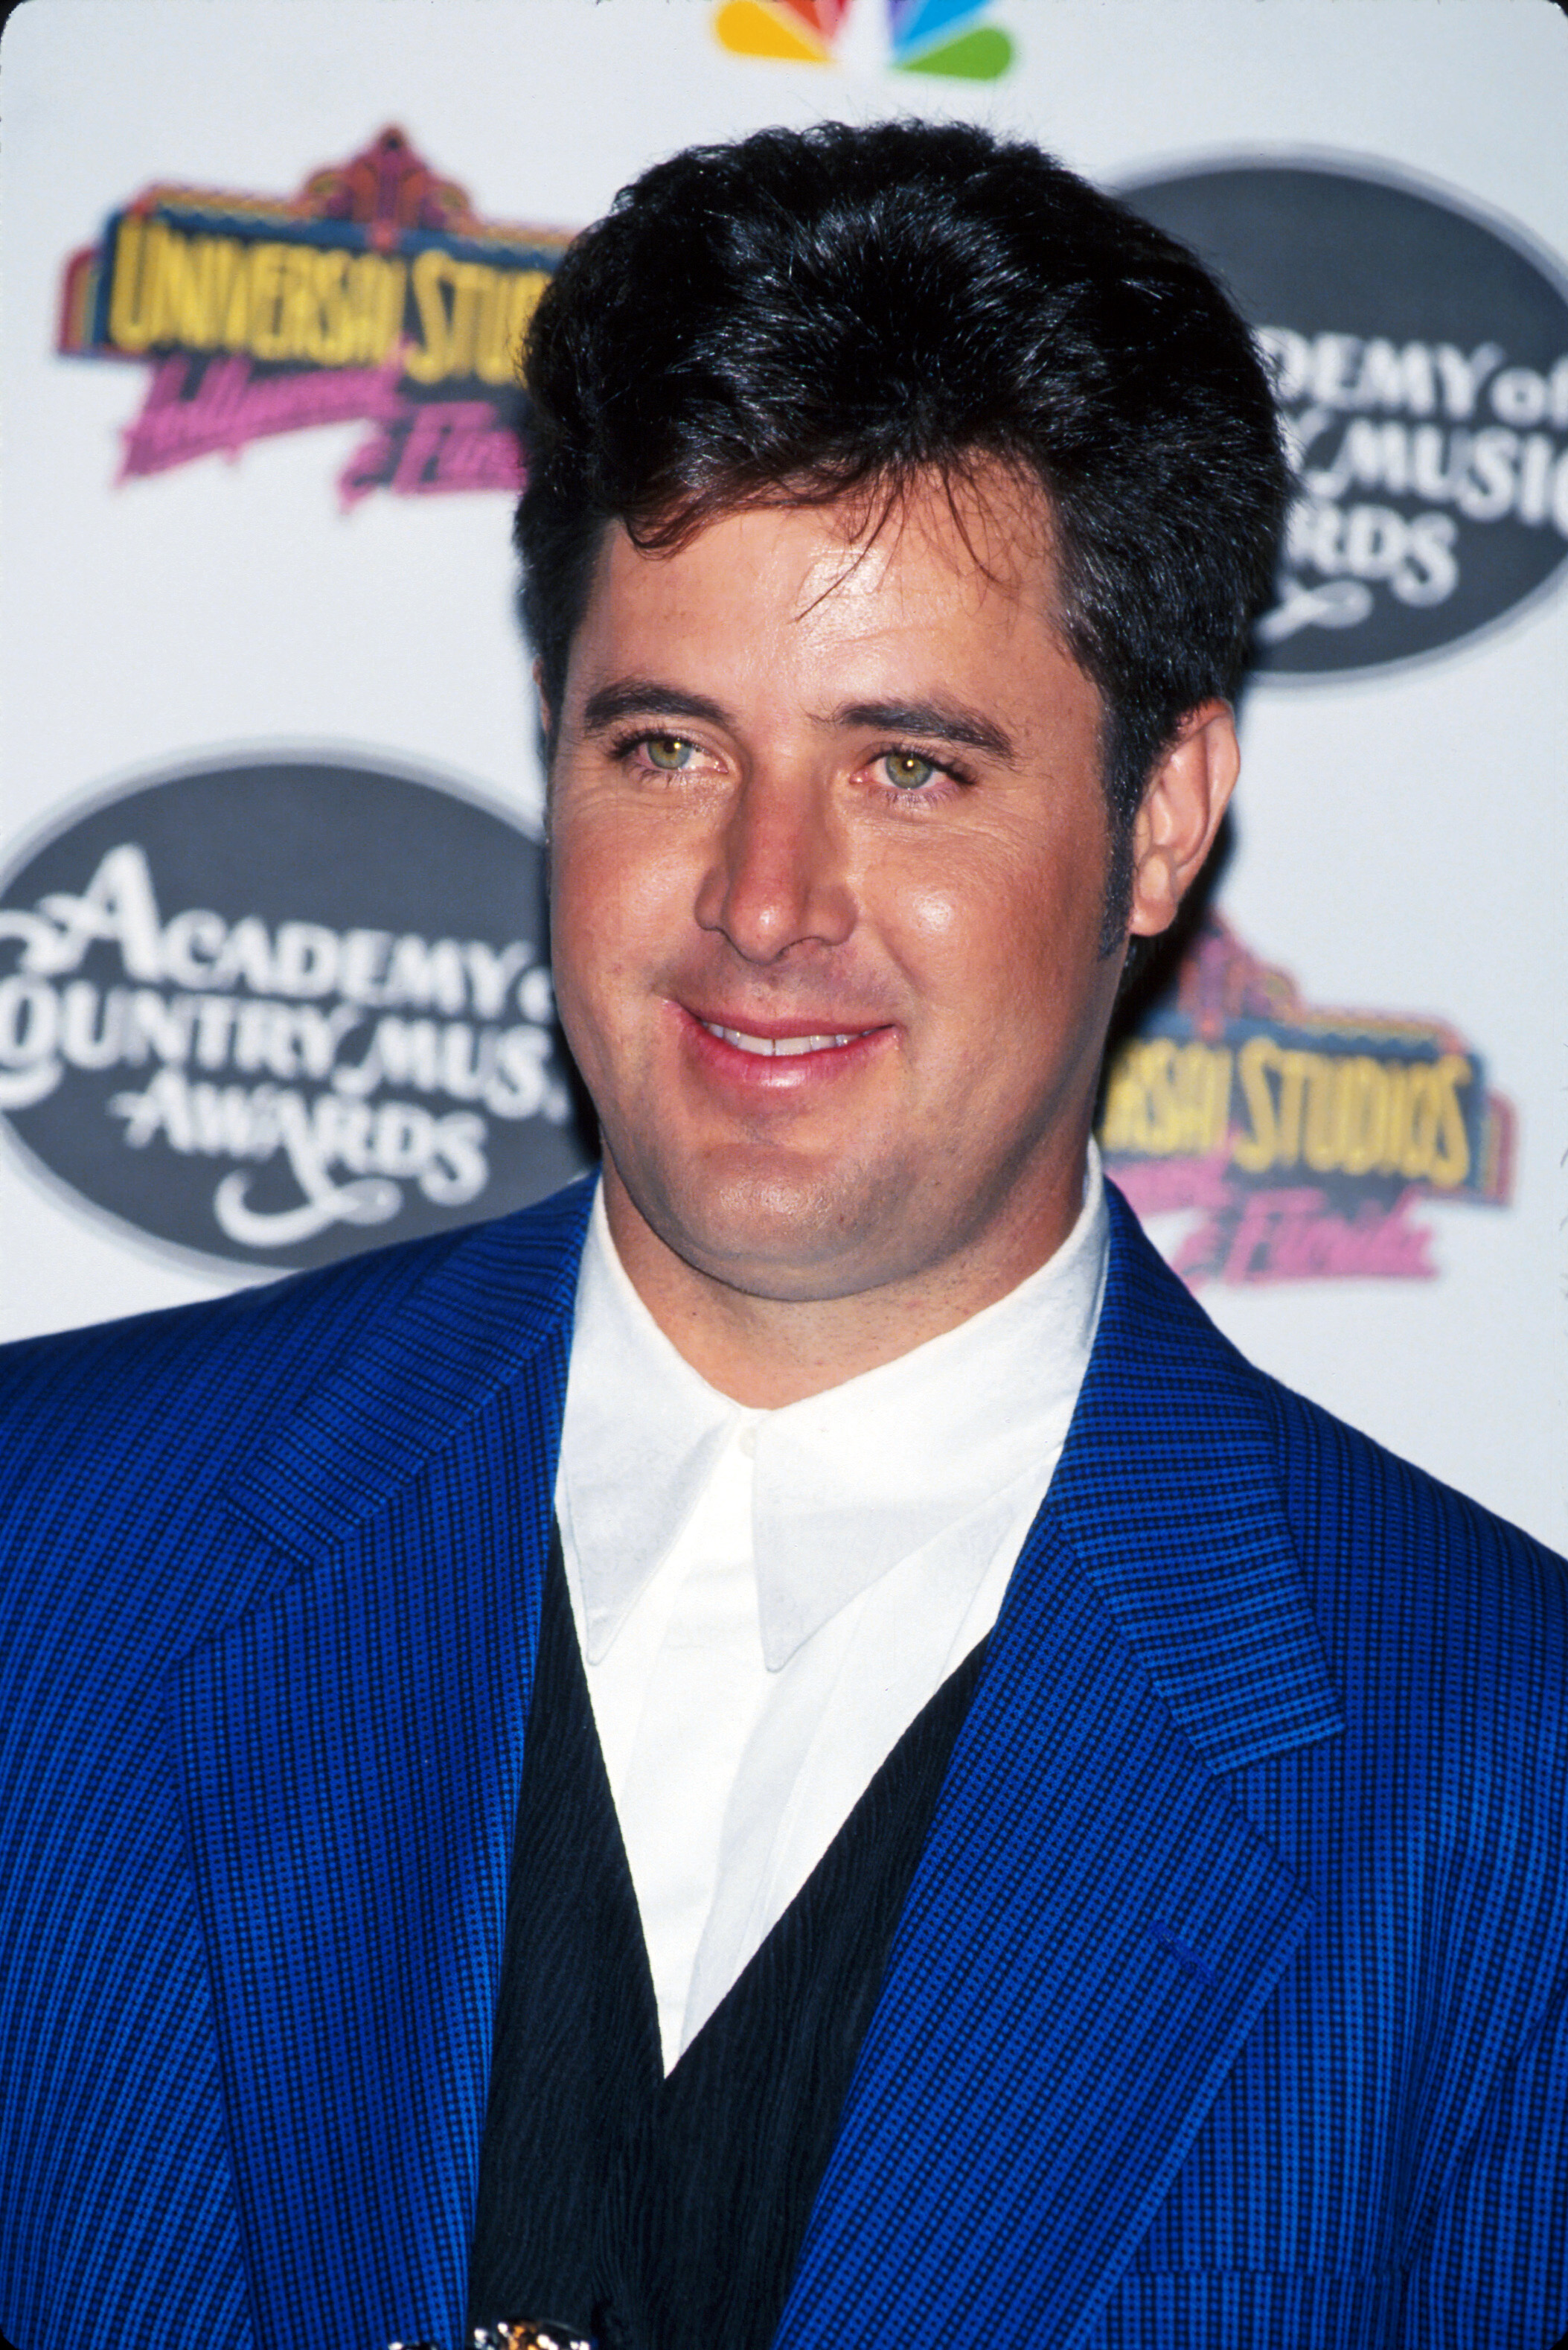 Vince Gill being still alive